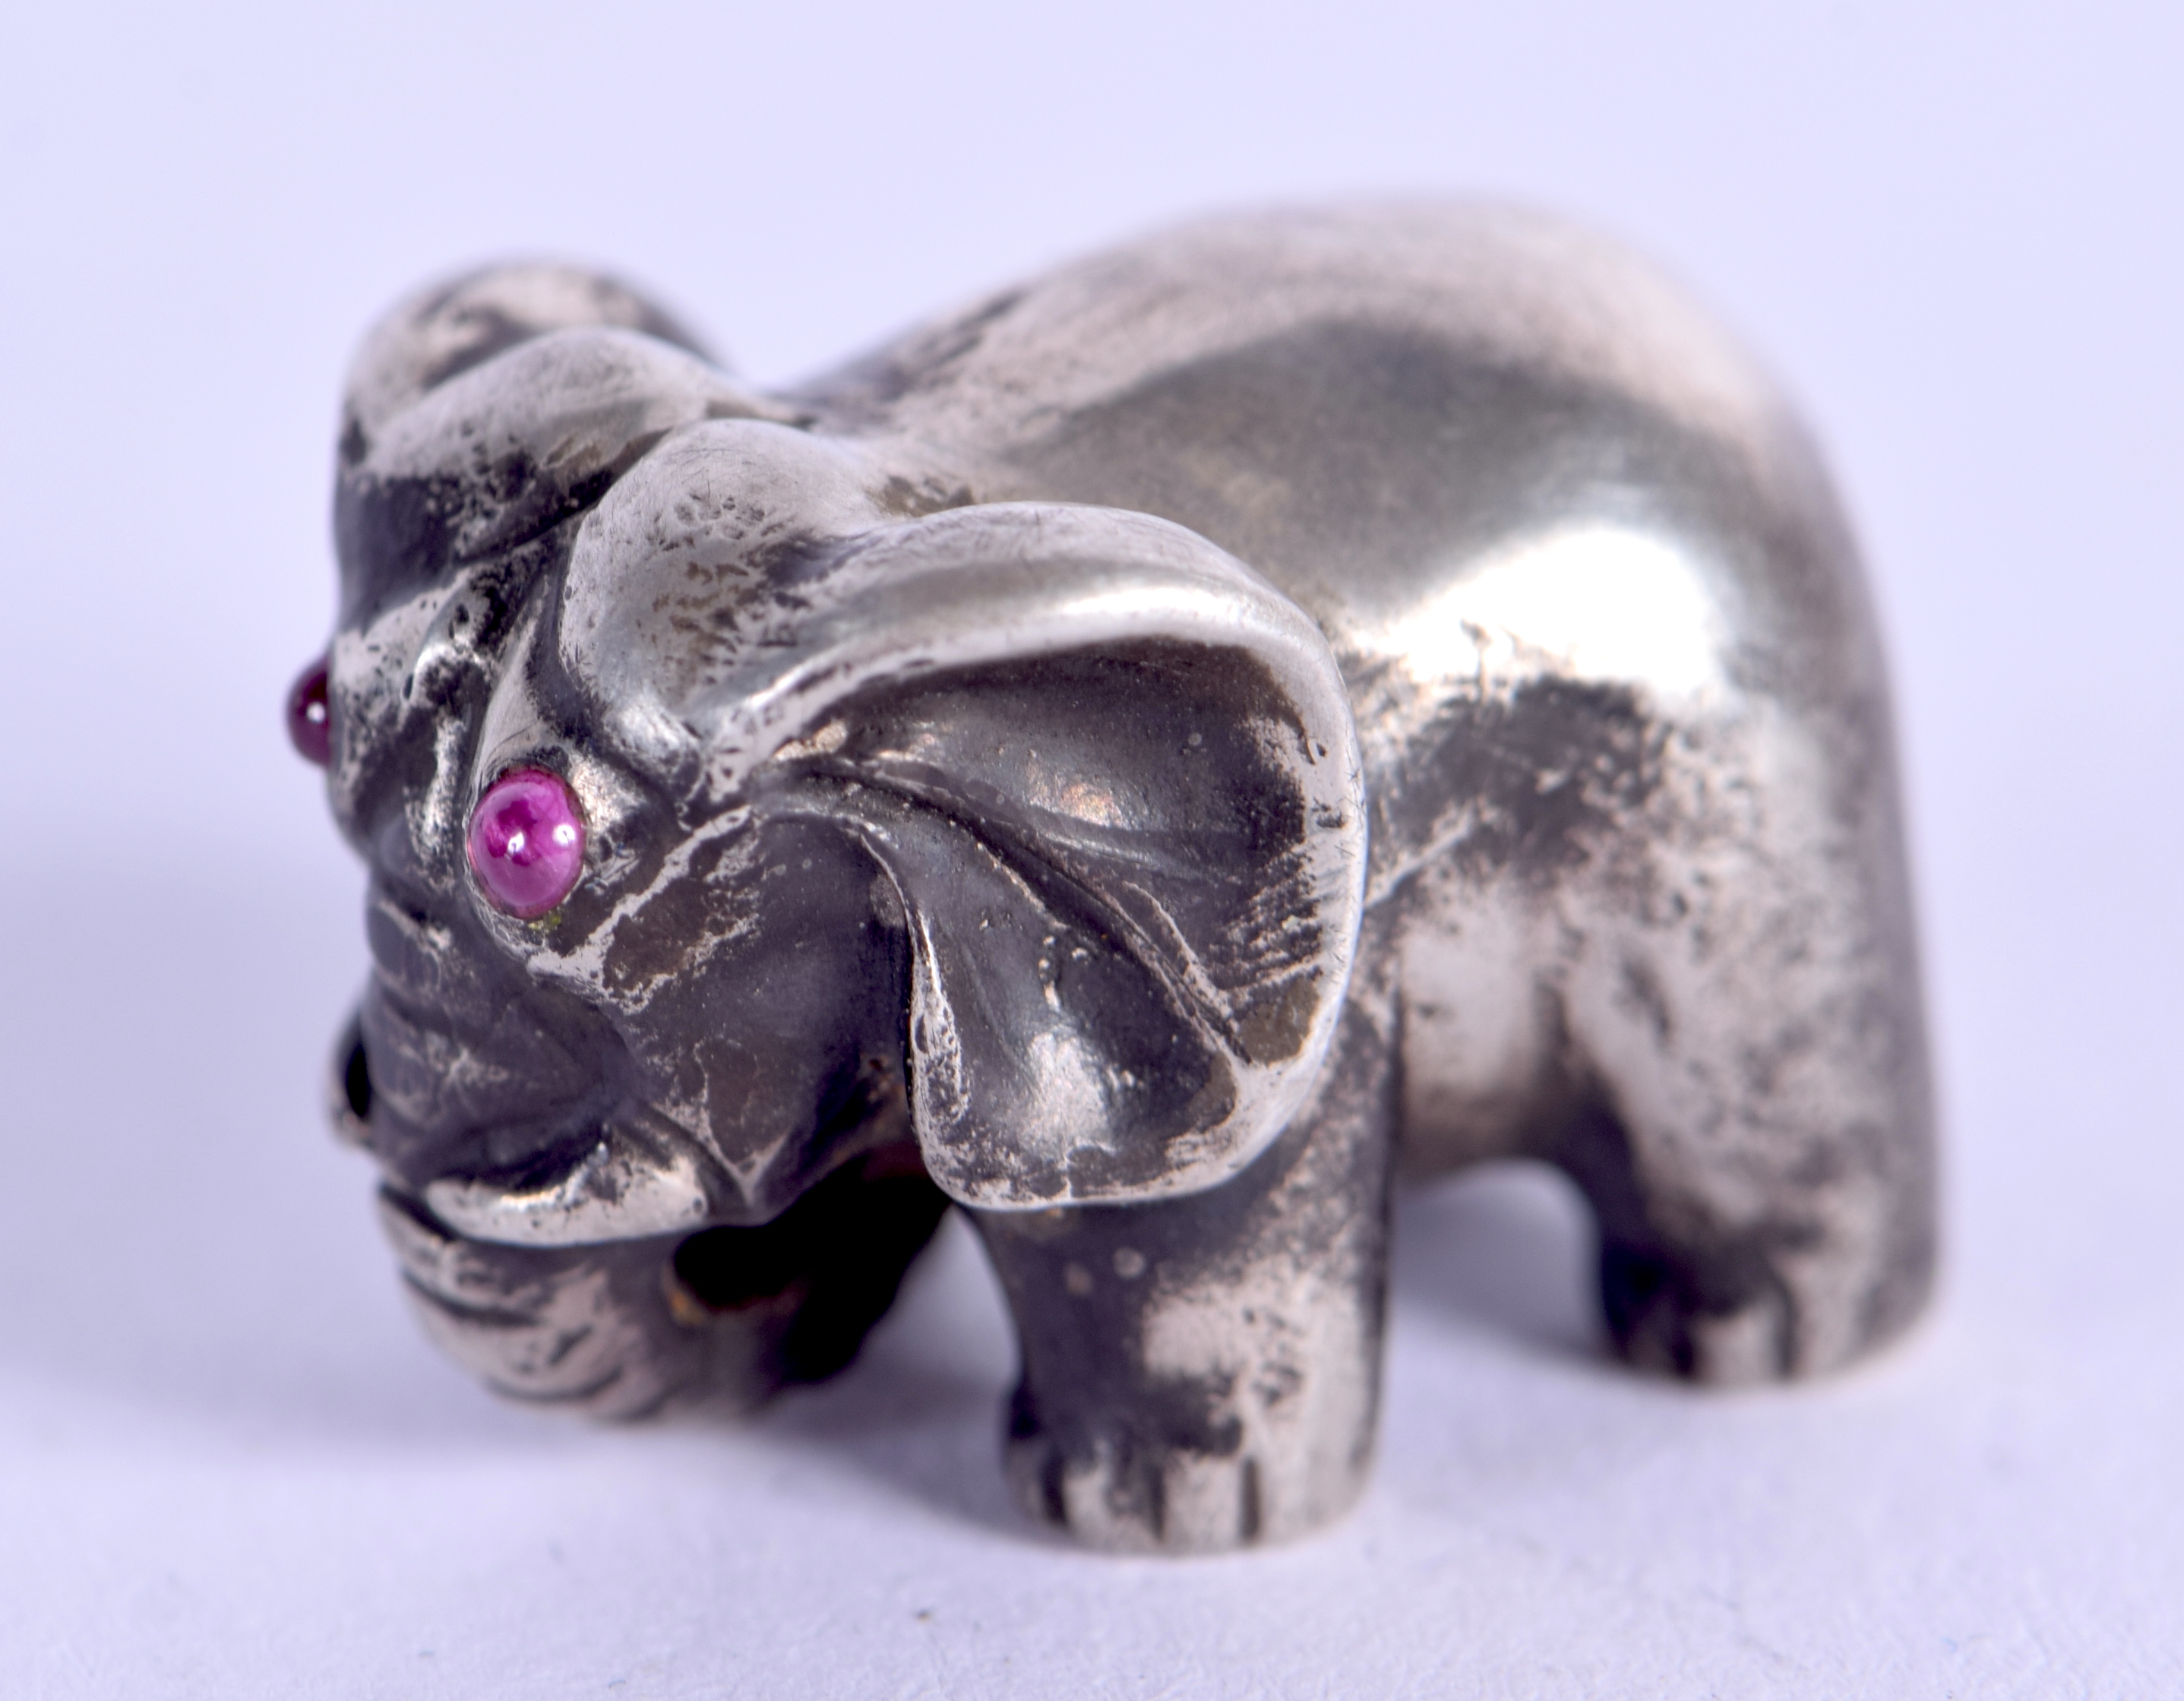 A SMALL CONTINENTAL FIGURE OF AN ELEPHANT. 16 grams. 1.5 cm wide.